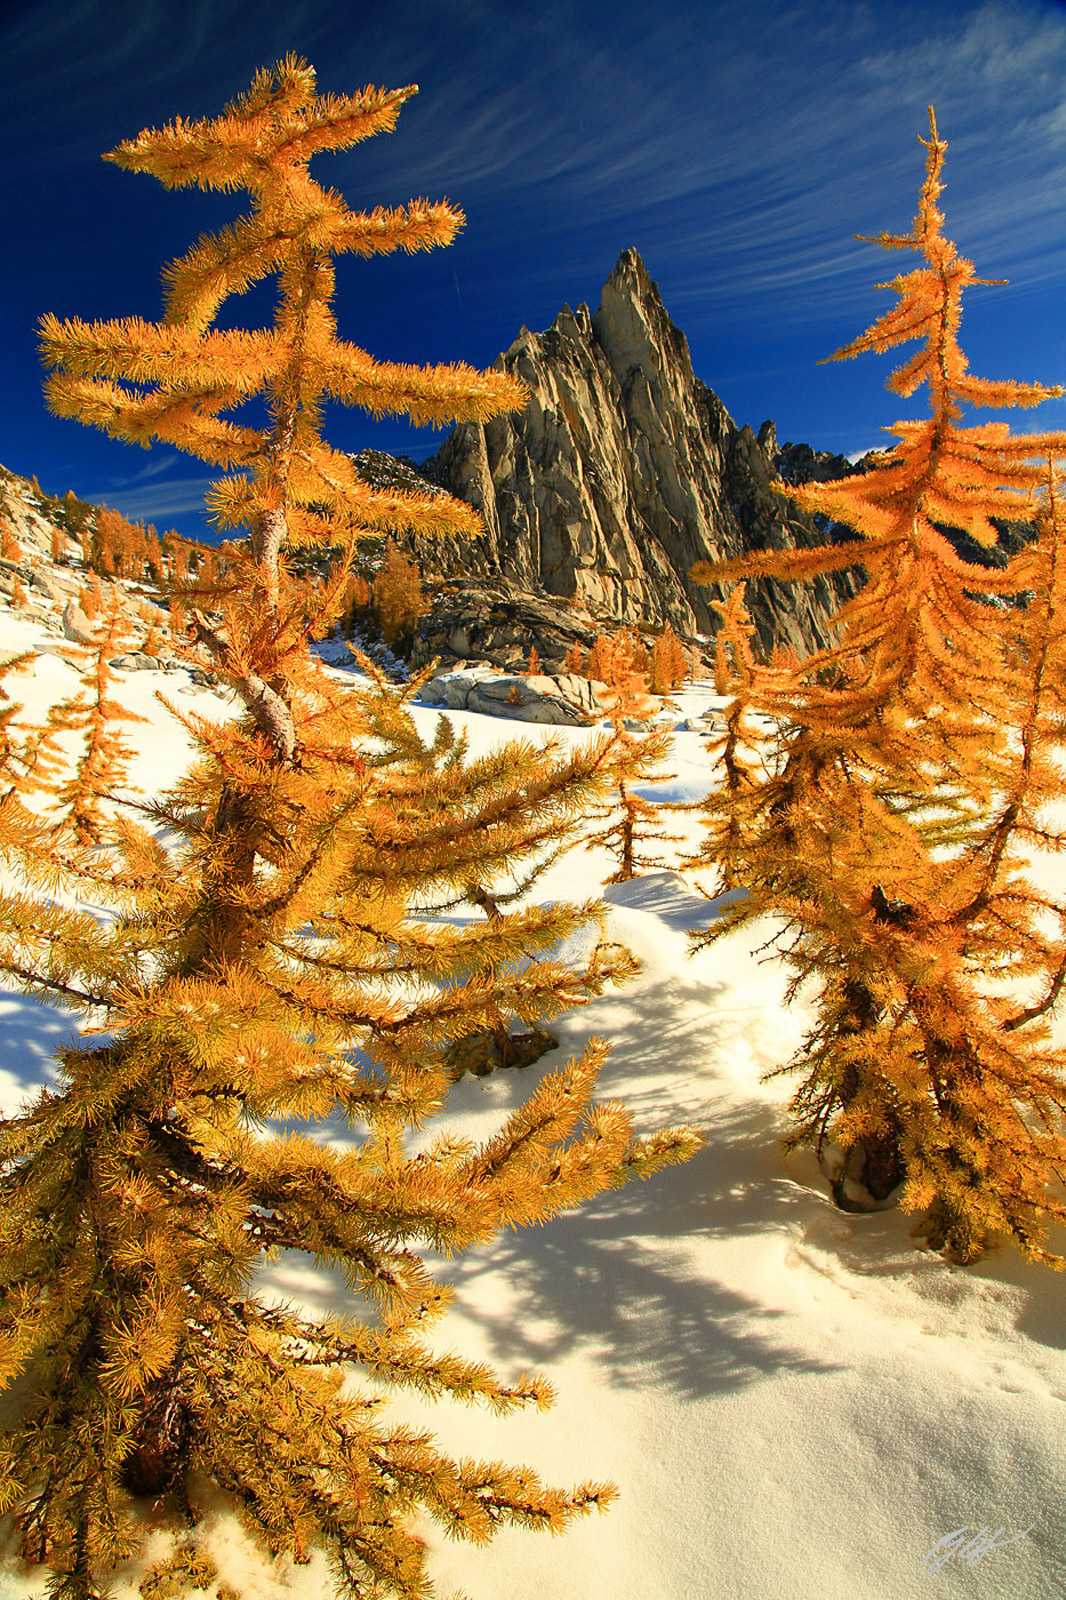 Golden Larch and Prusik Peak in the Enchantments, Alpine Lakes Wilderness in Washington